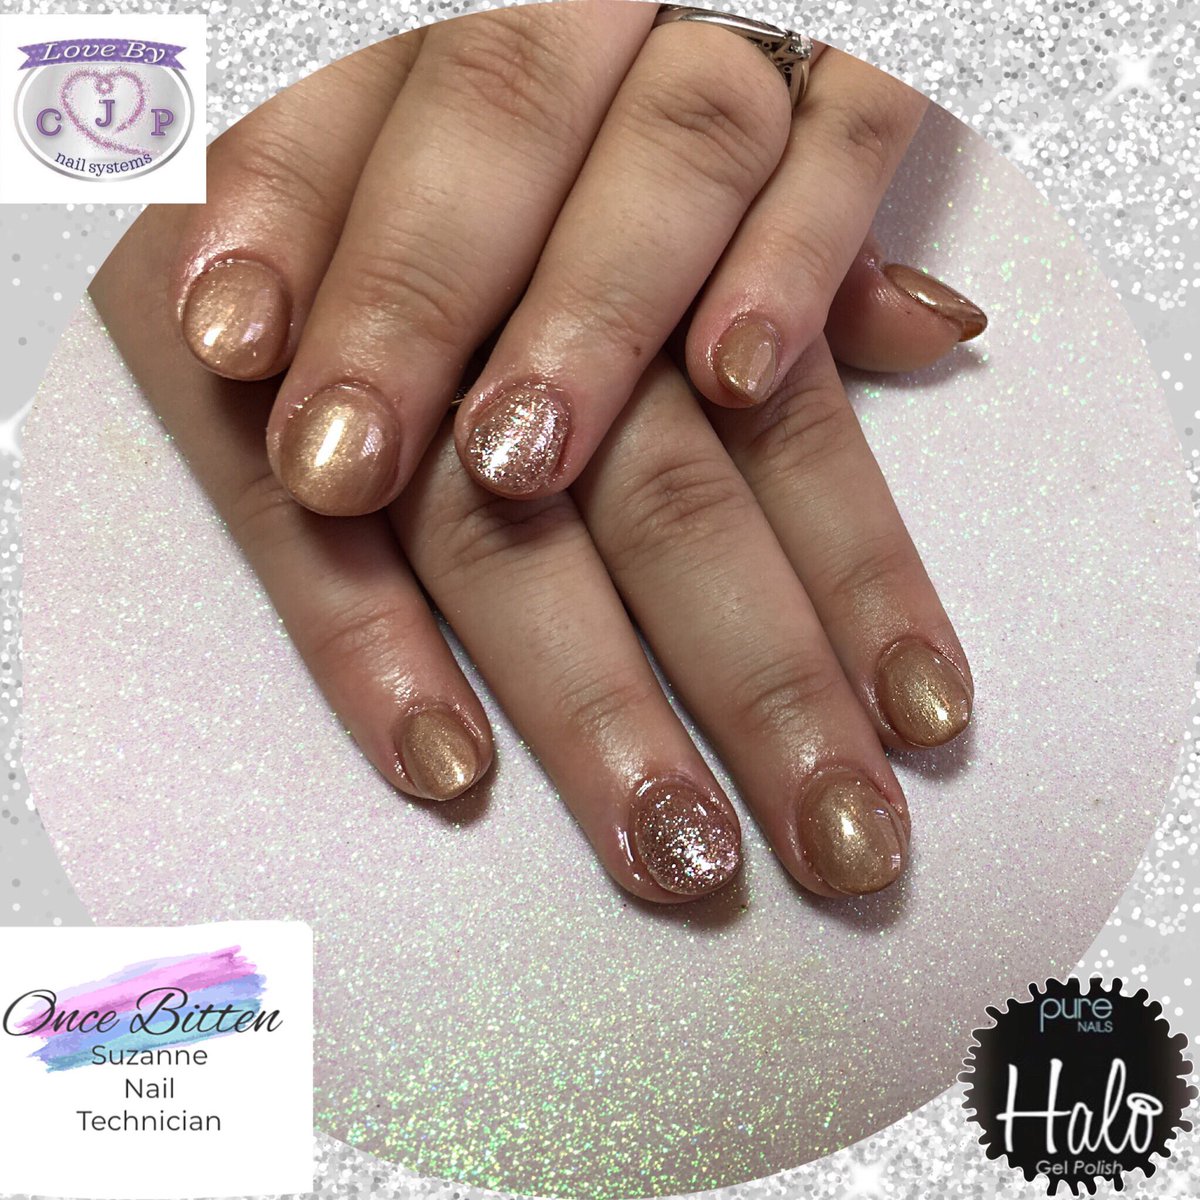 Welcome to new client Jessica who came this morning for acrylic extensions and chose ‘Butterscotch’ with ‘Rose Gold Sparkle’ on the accent nails. 
#GelPolish #PureNails
#Halo #Glitter #Butterscotch #RoseGoldSparkle
#CJPAcrylicSystems #CrystalGlass #NailArt
#Pampertime